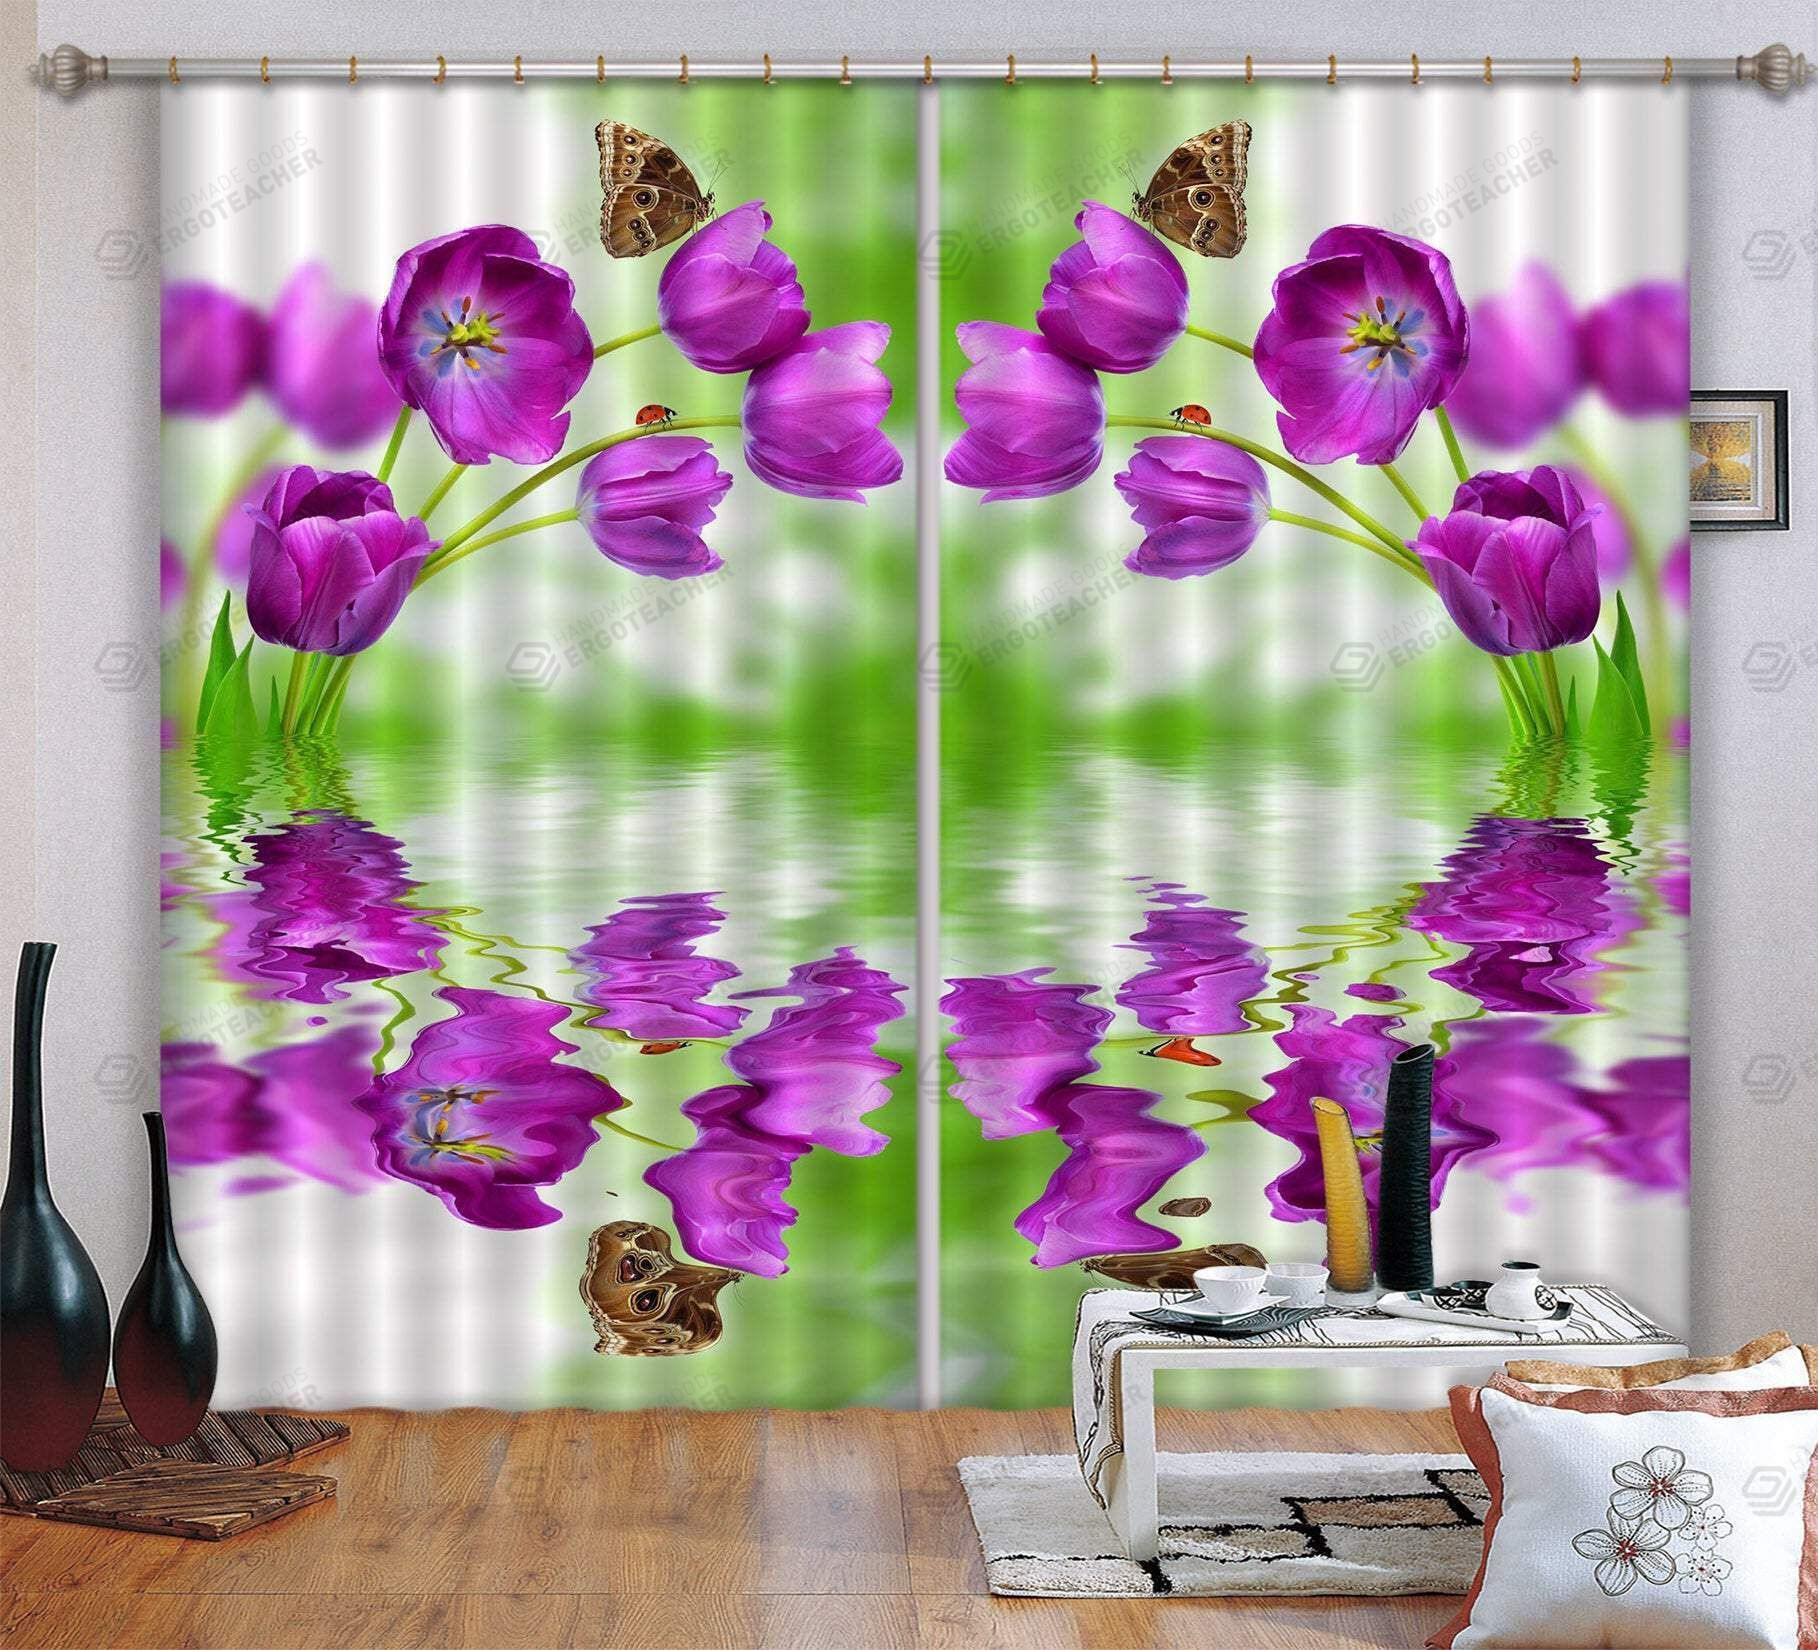 3D Flowers With Butterflies Printed Window Curtains